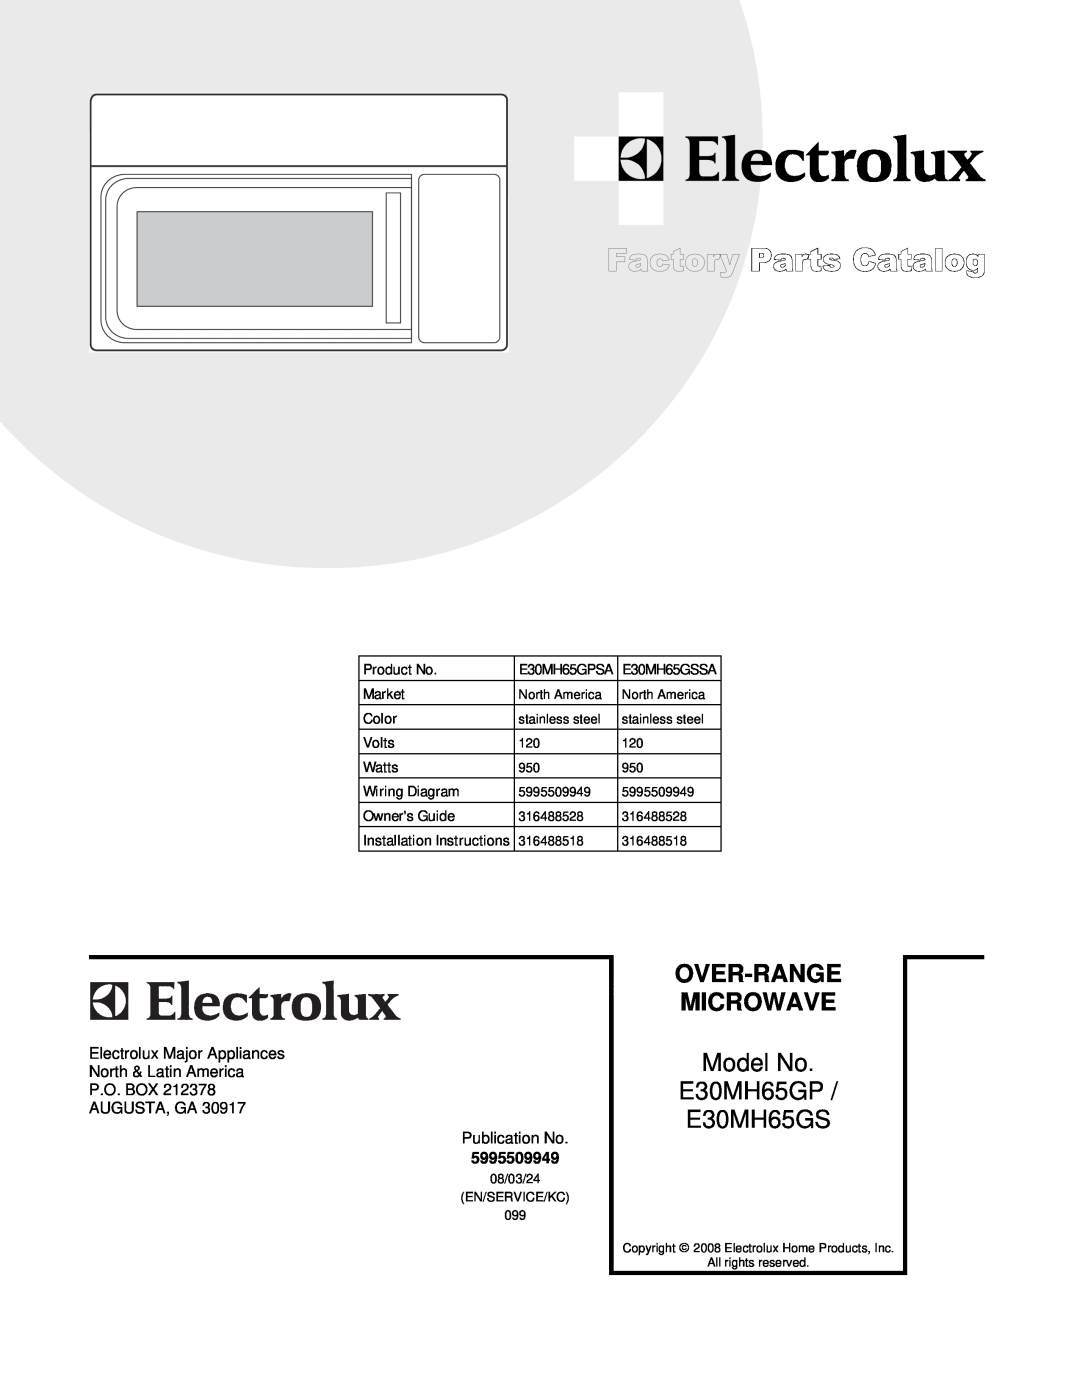 Electrolux E30MH65GPSA installation instructions Product No, Market, Color, Volts, Watts, Wiring Diagram, Owners Guide 